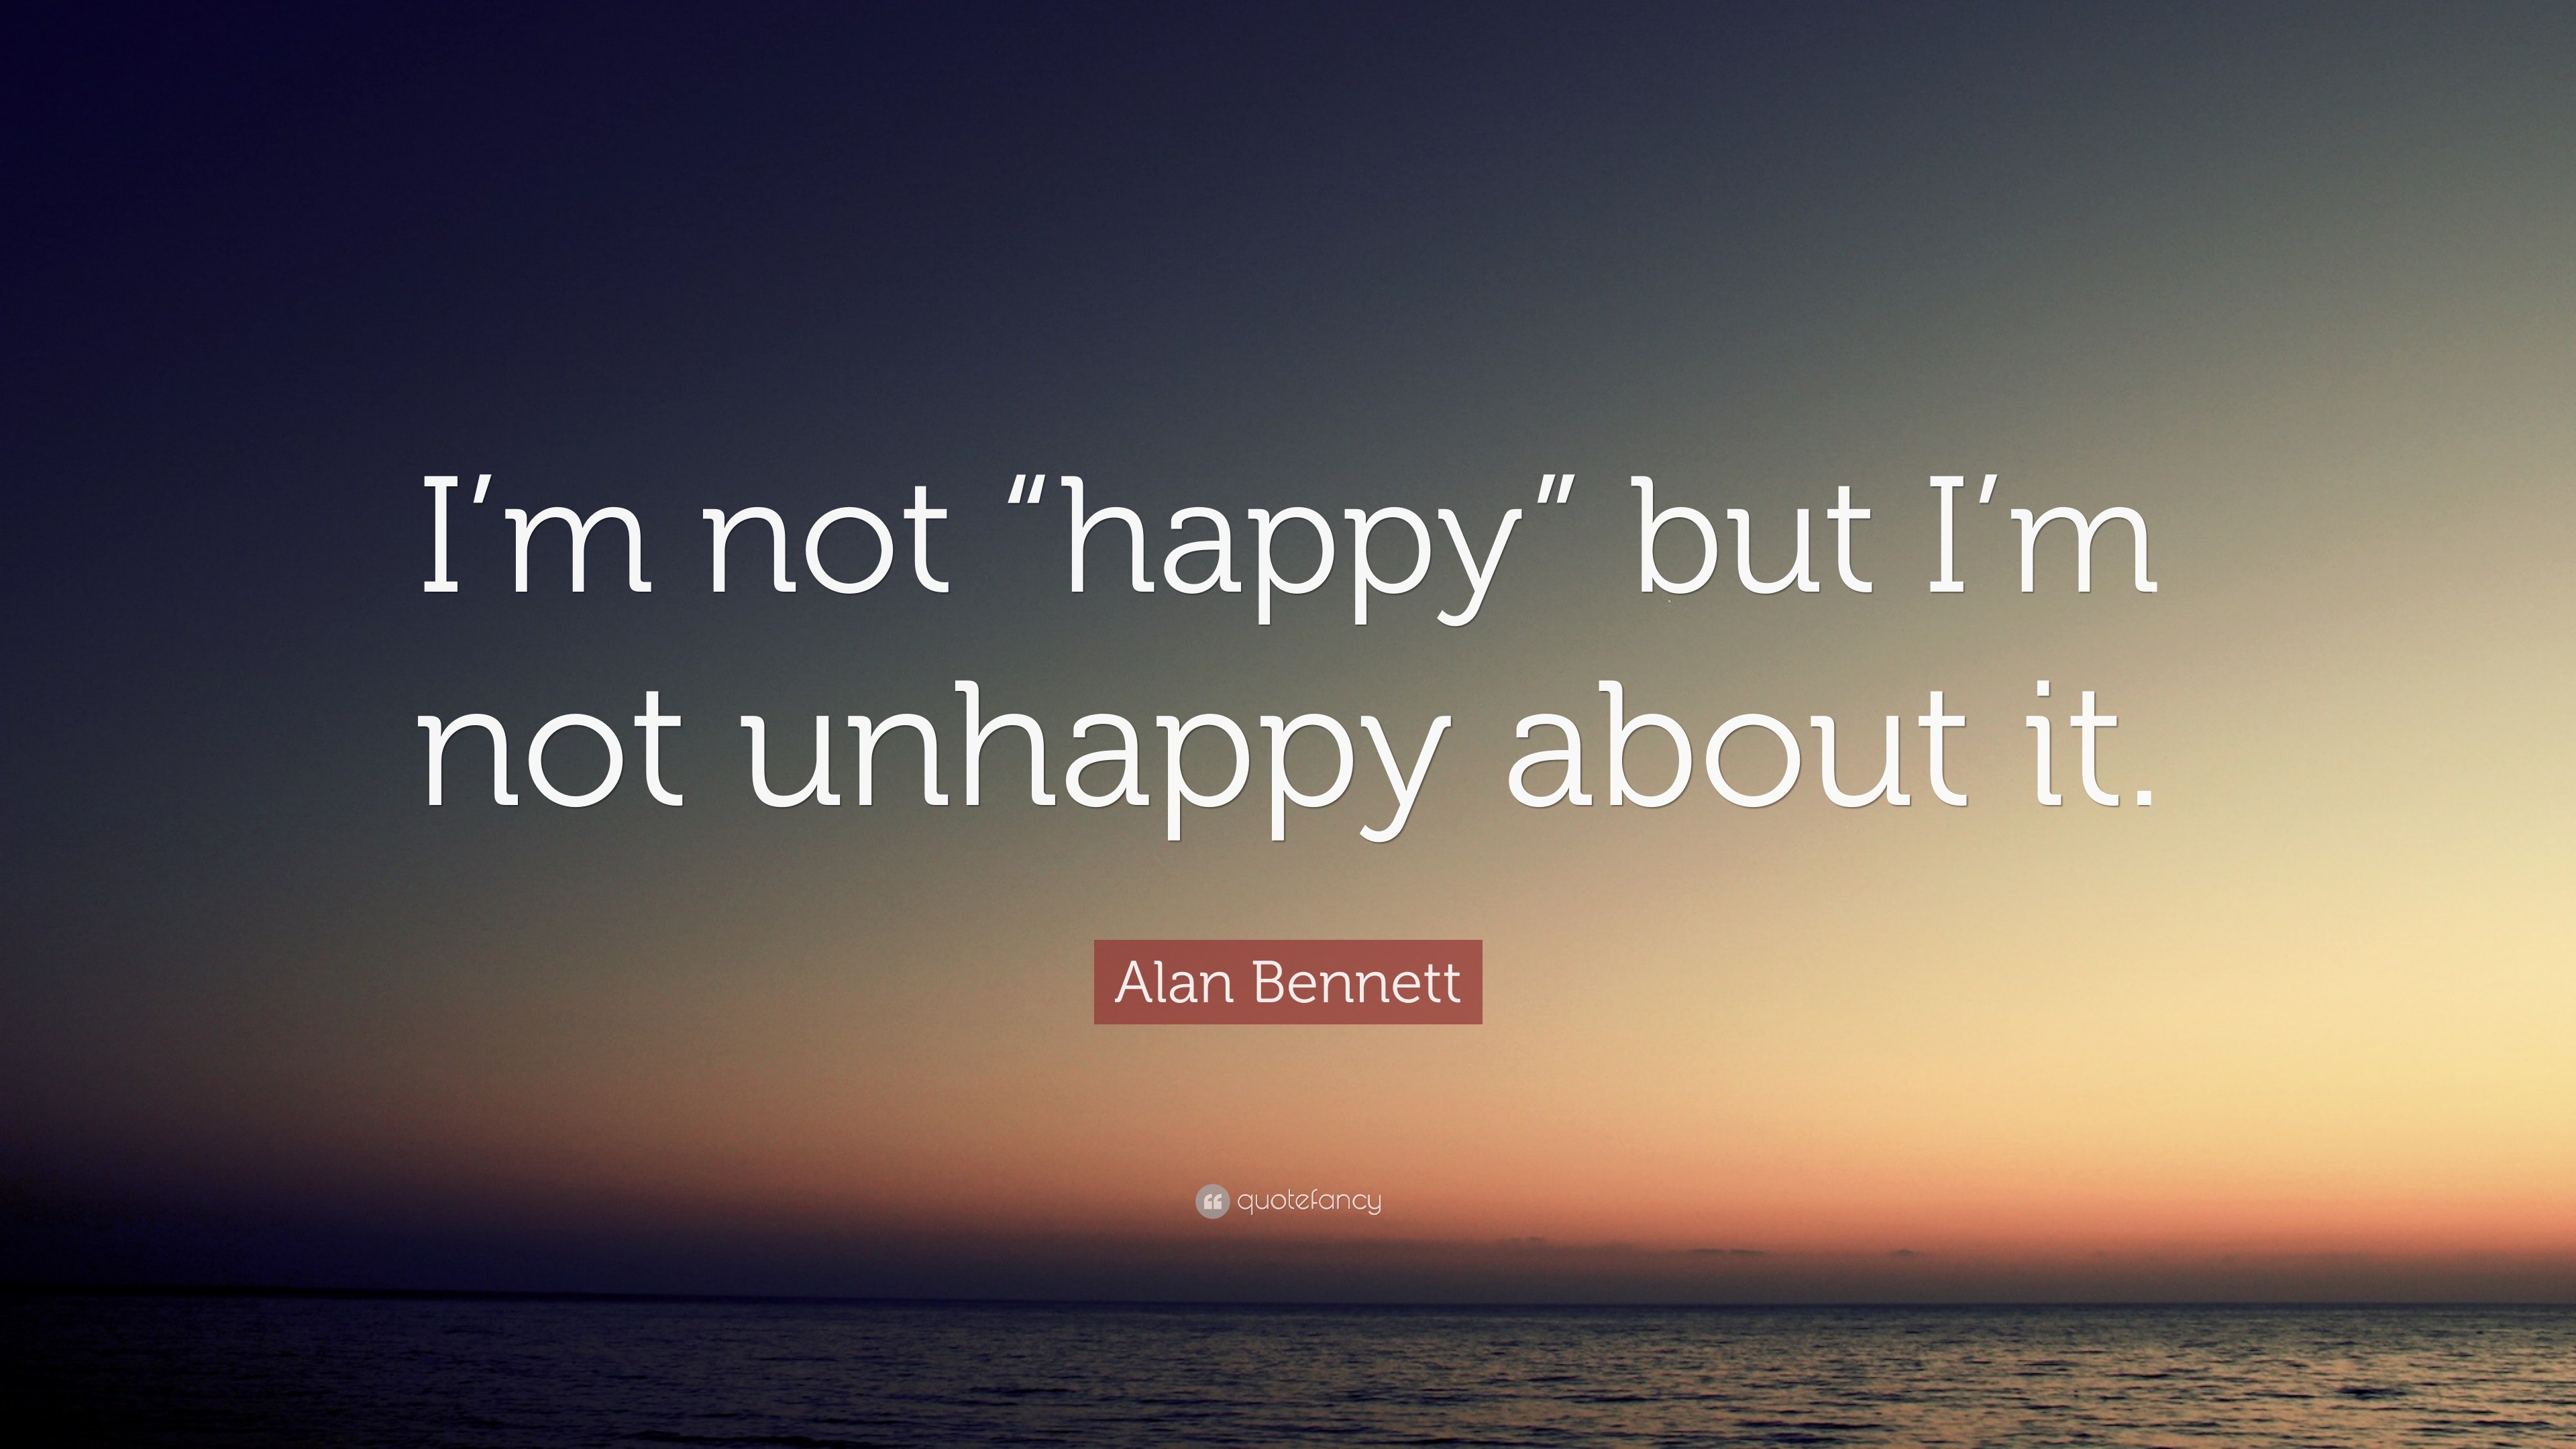 Alan Bennett Quote: “I’m not “happy” but I’m not unhappy about it.” (9 wallpapers) - Quotefancy